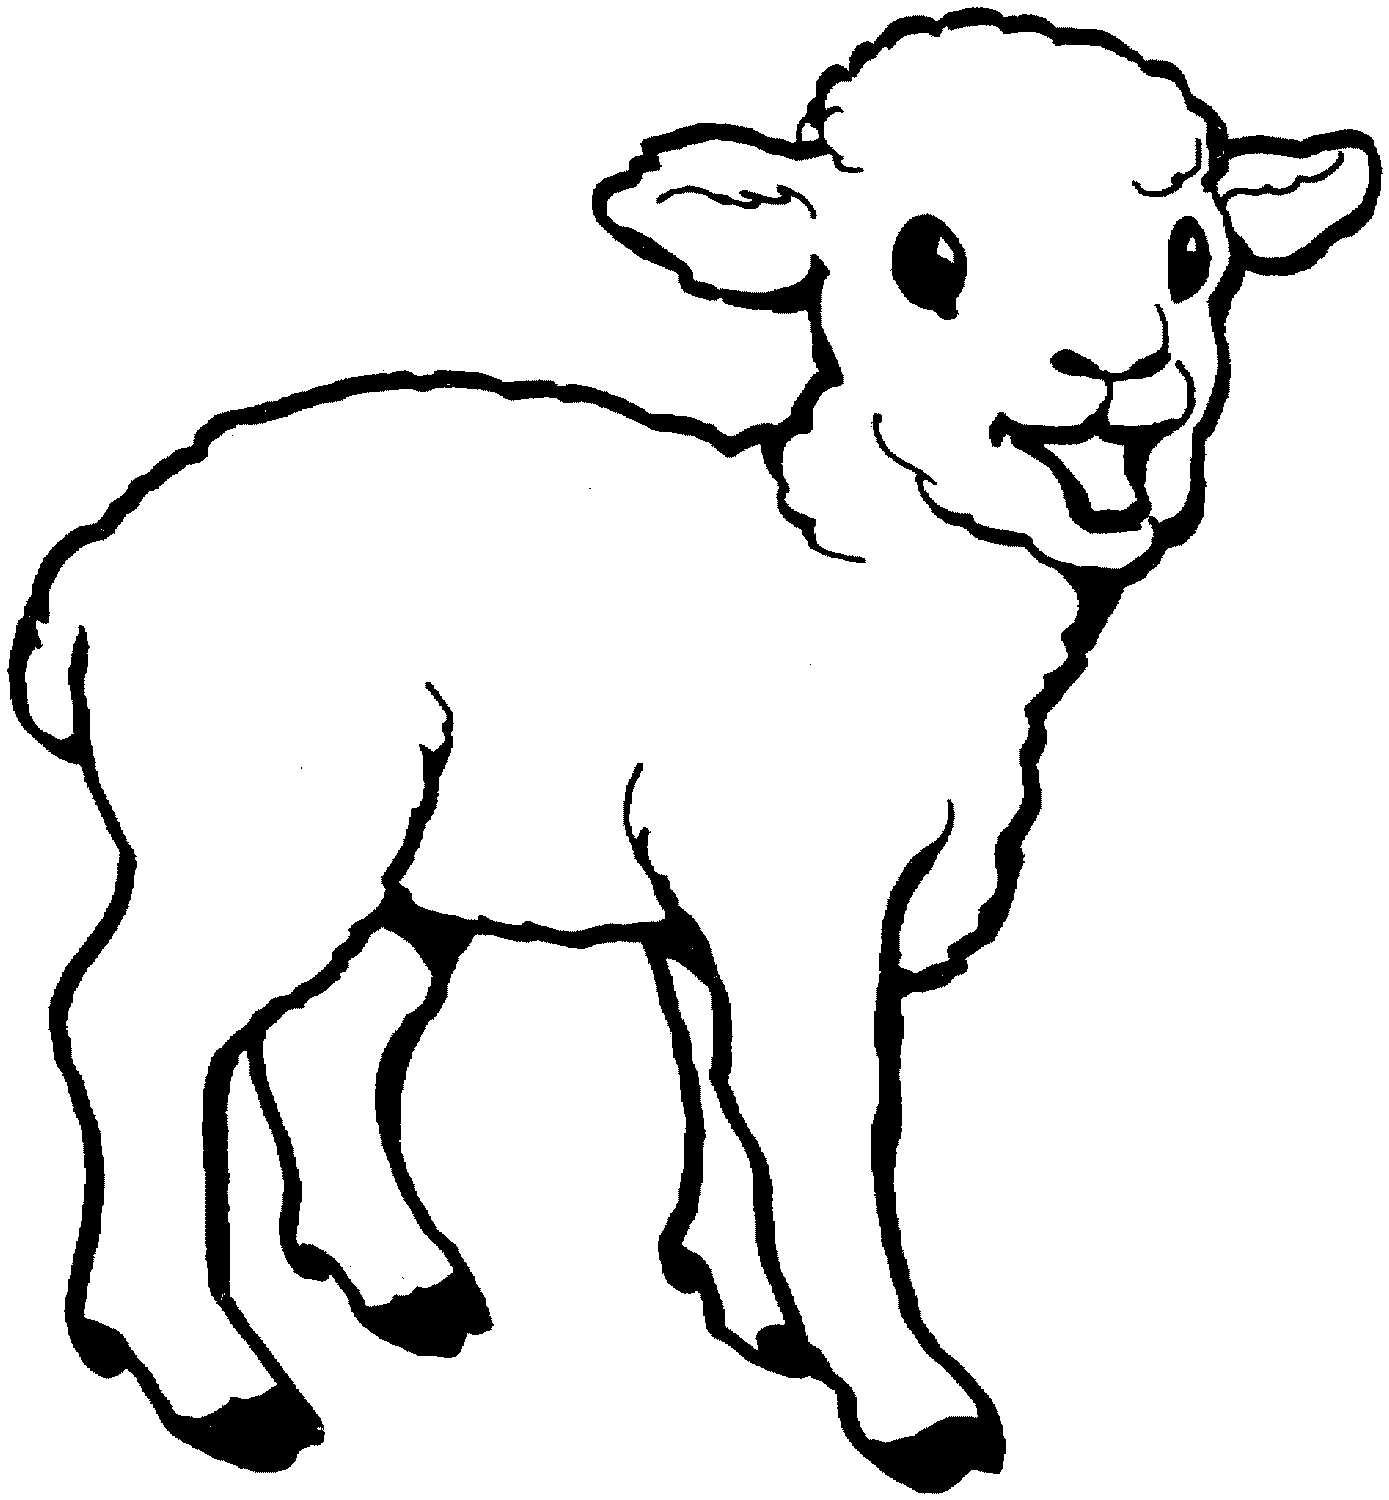 Coloring pages of sheep and